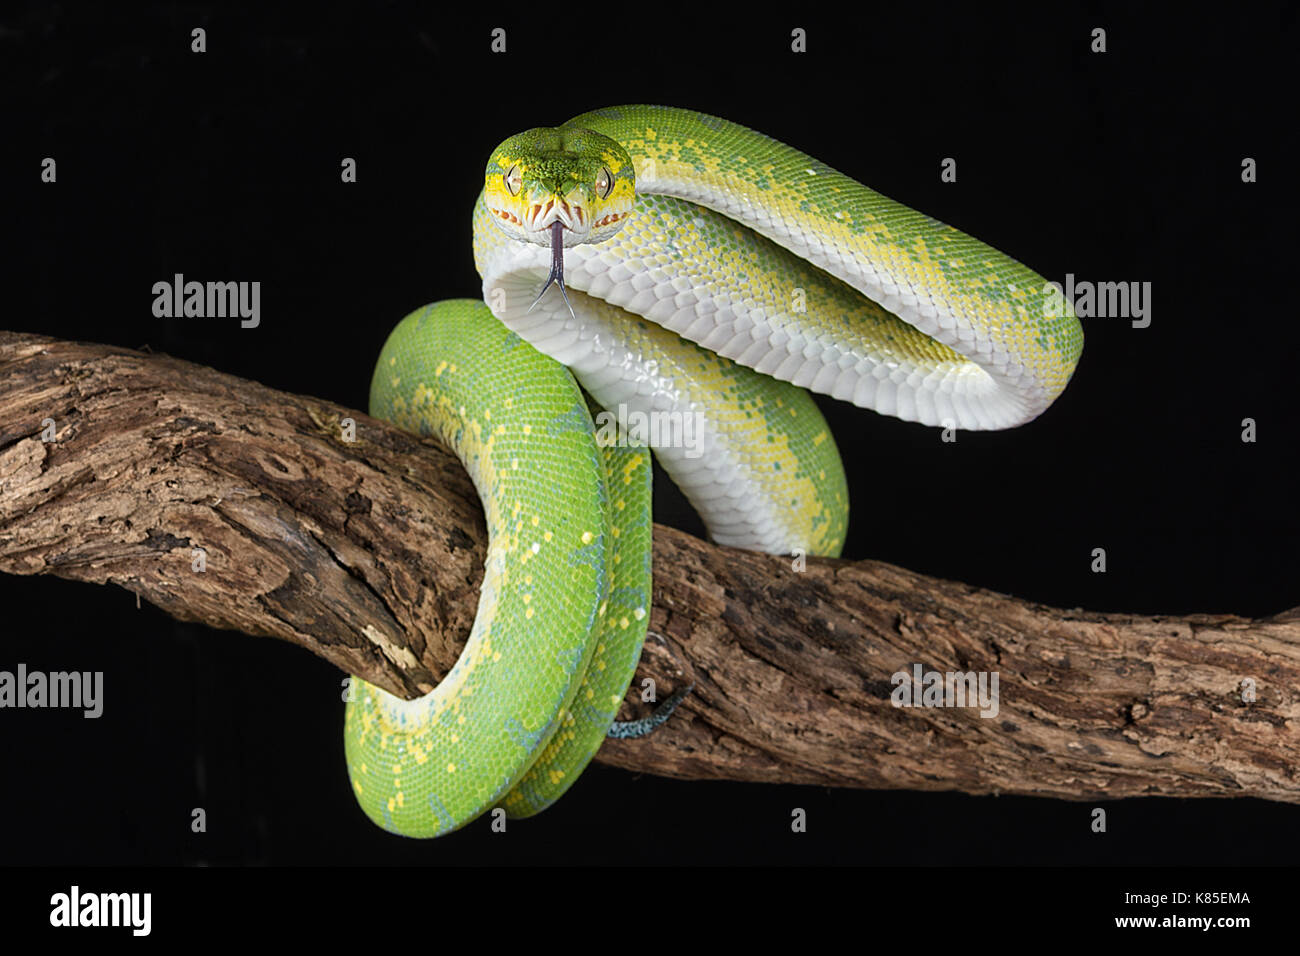 a green tree python wrapped around a branch with its tongue out about to strike against a black background Stock Photo